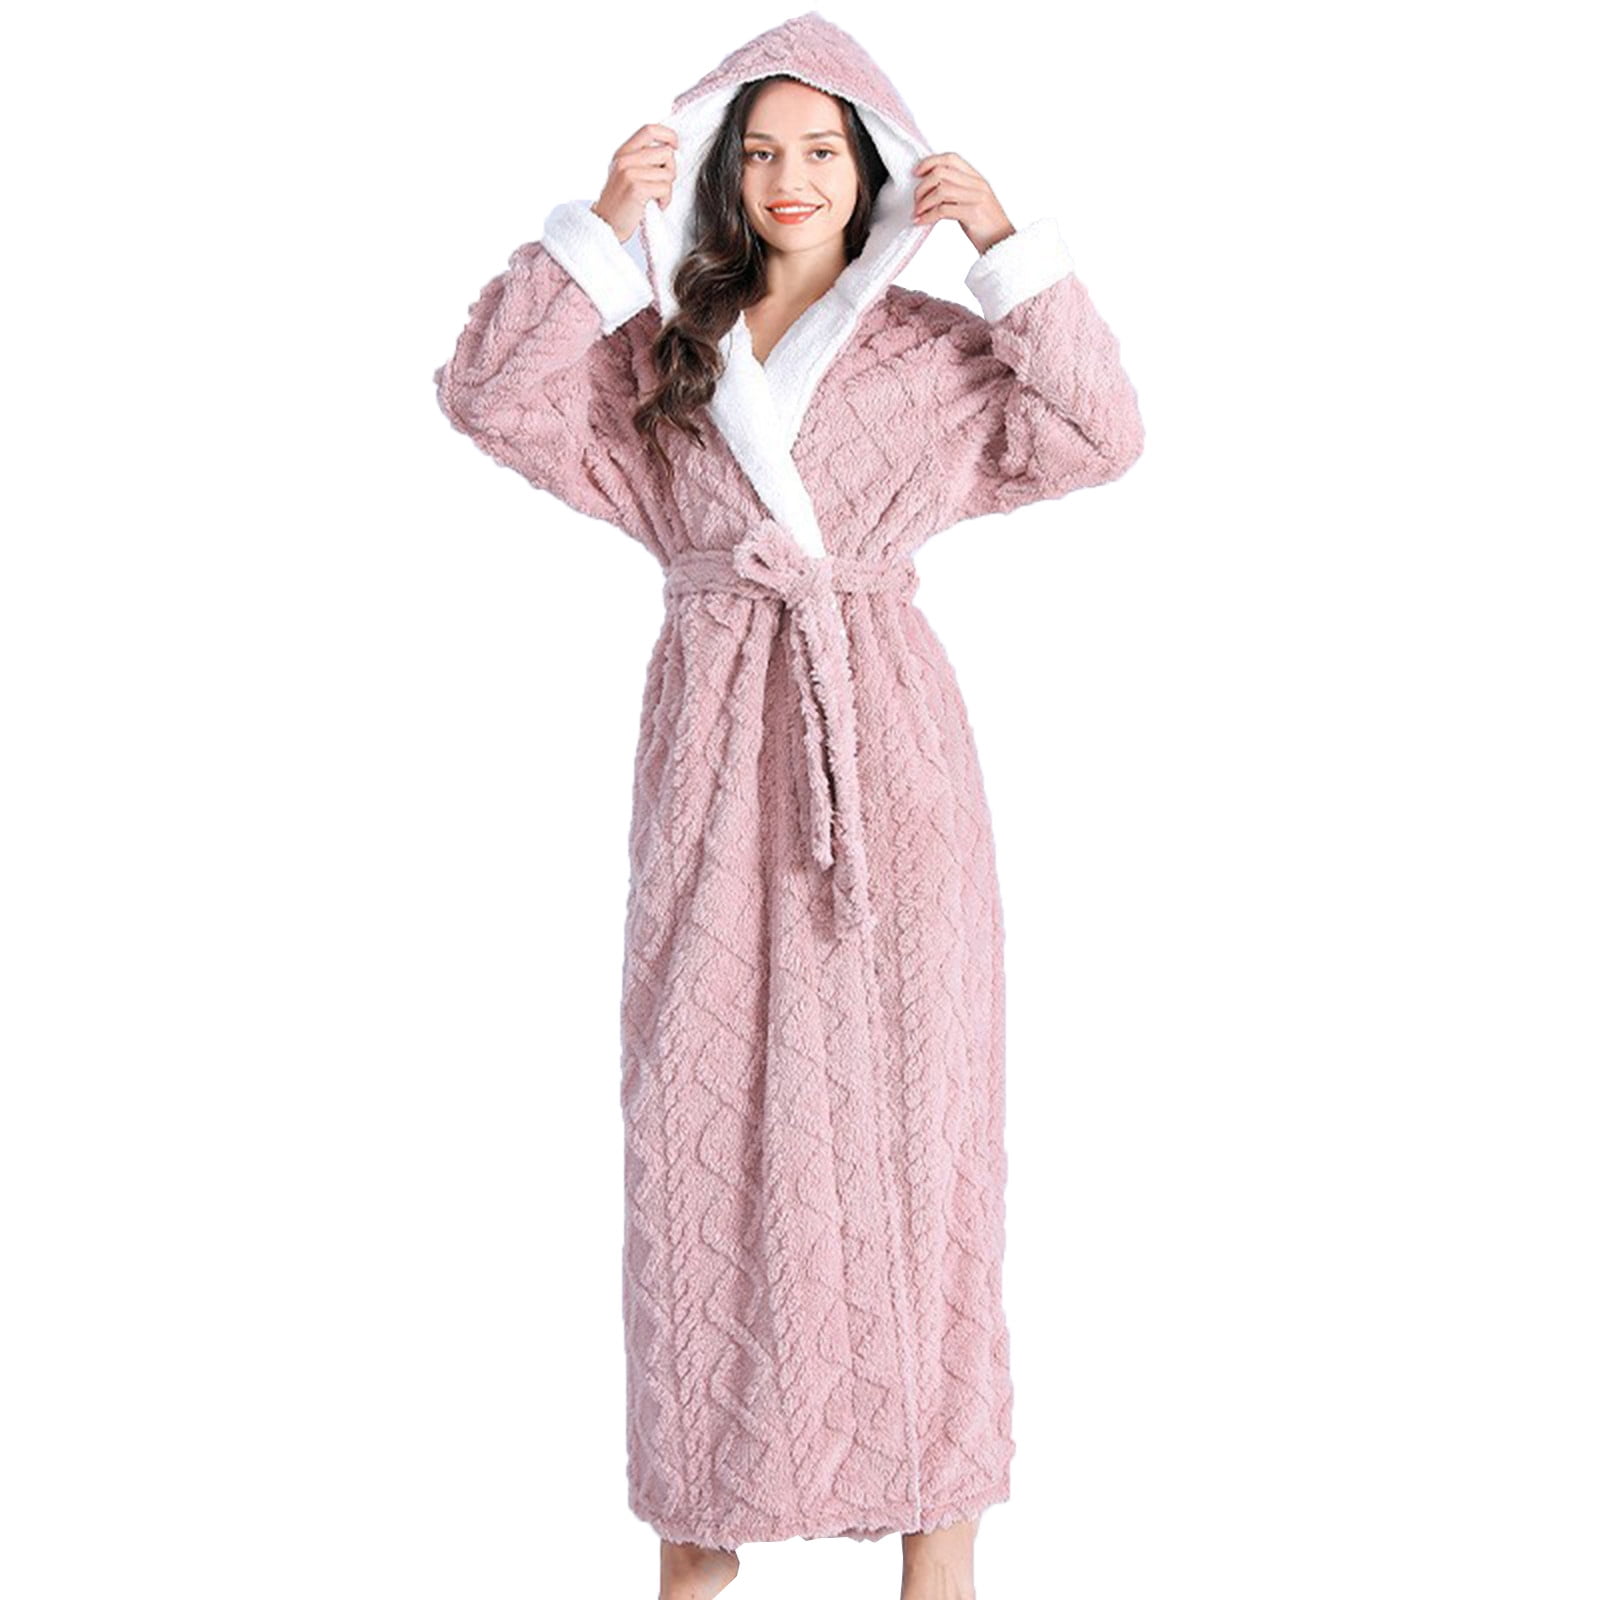 Ladies Dressing Gowns Fluffy,Hooded Long Nightgowns for Women